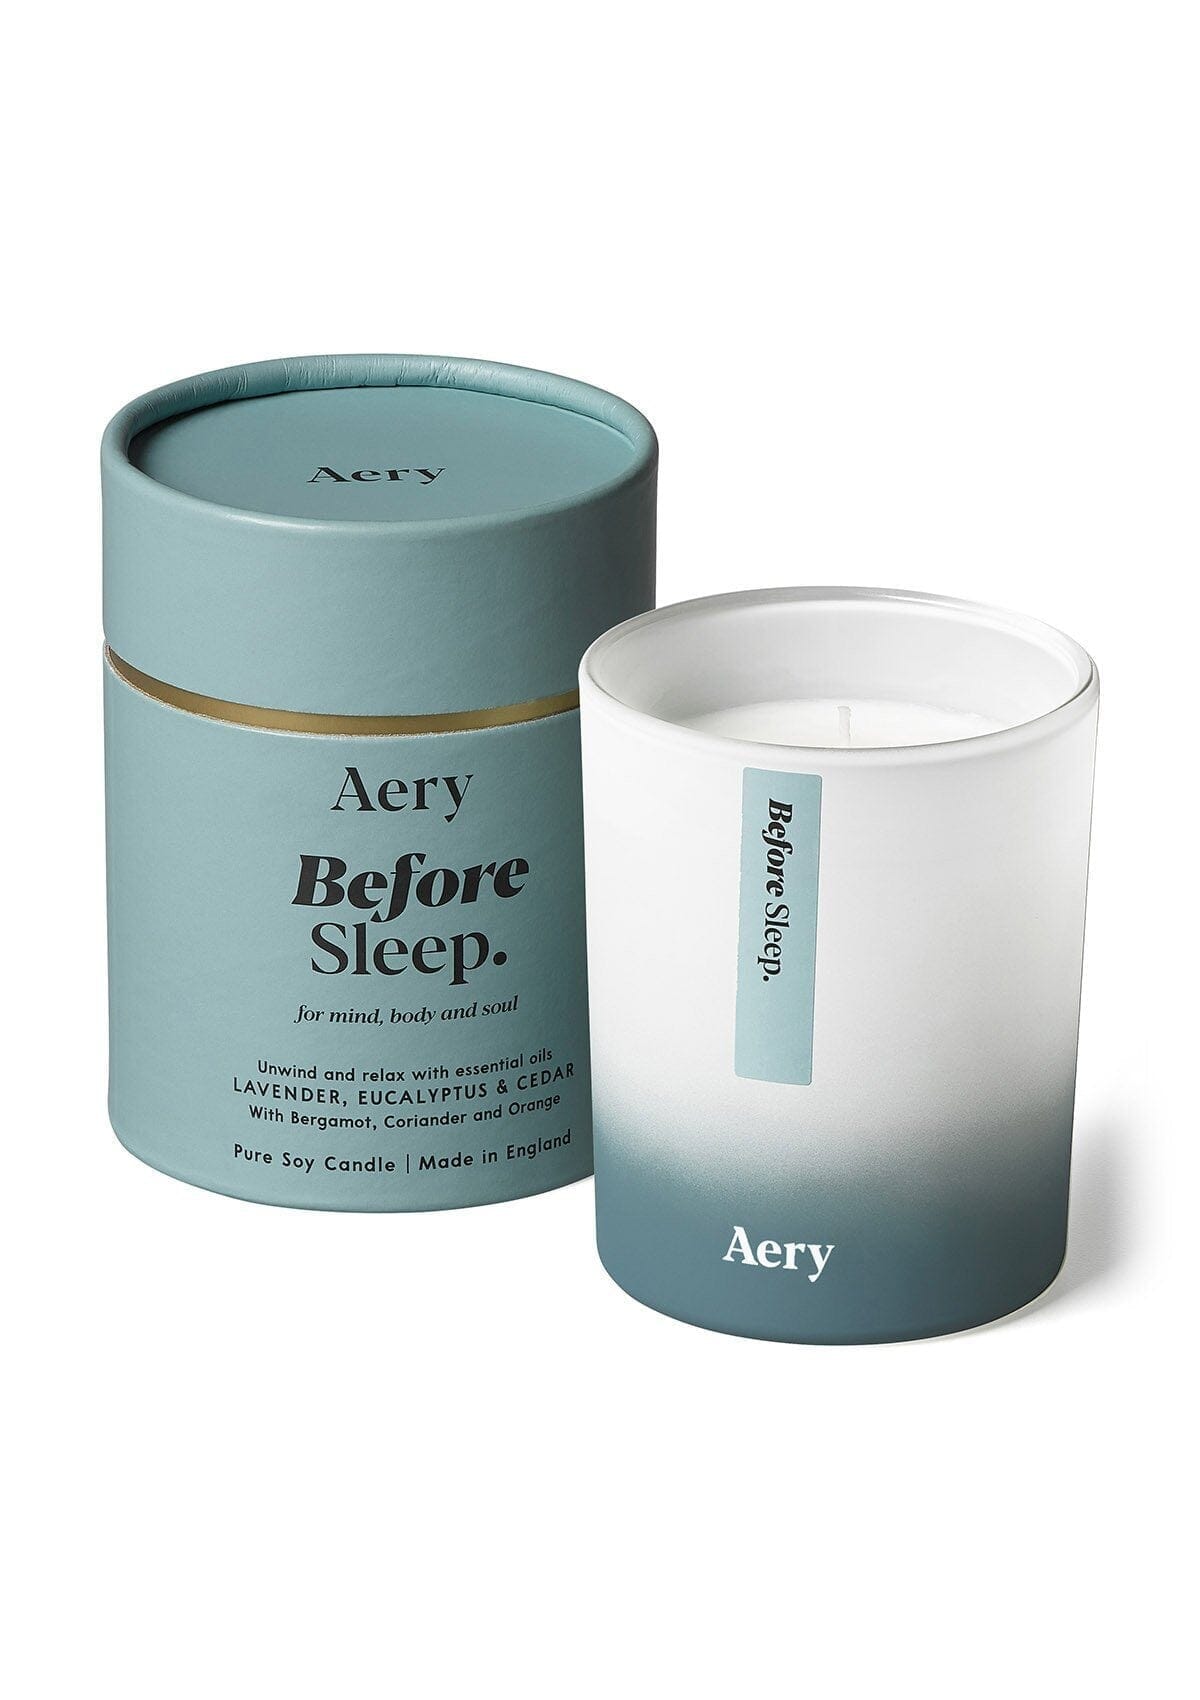 before sleep lavender scented candle by aery living next to blue product packaging on a white background